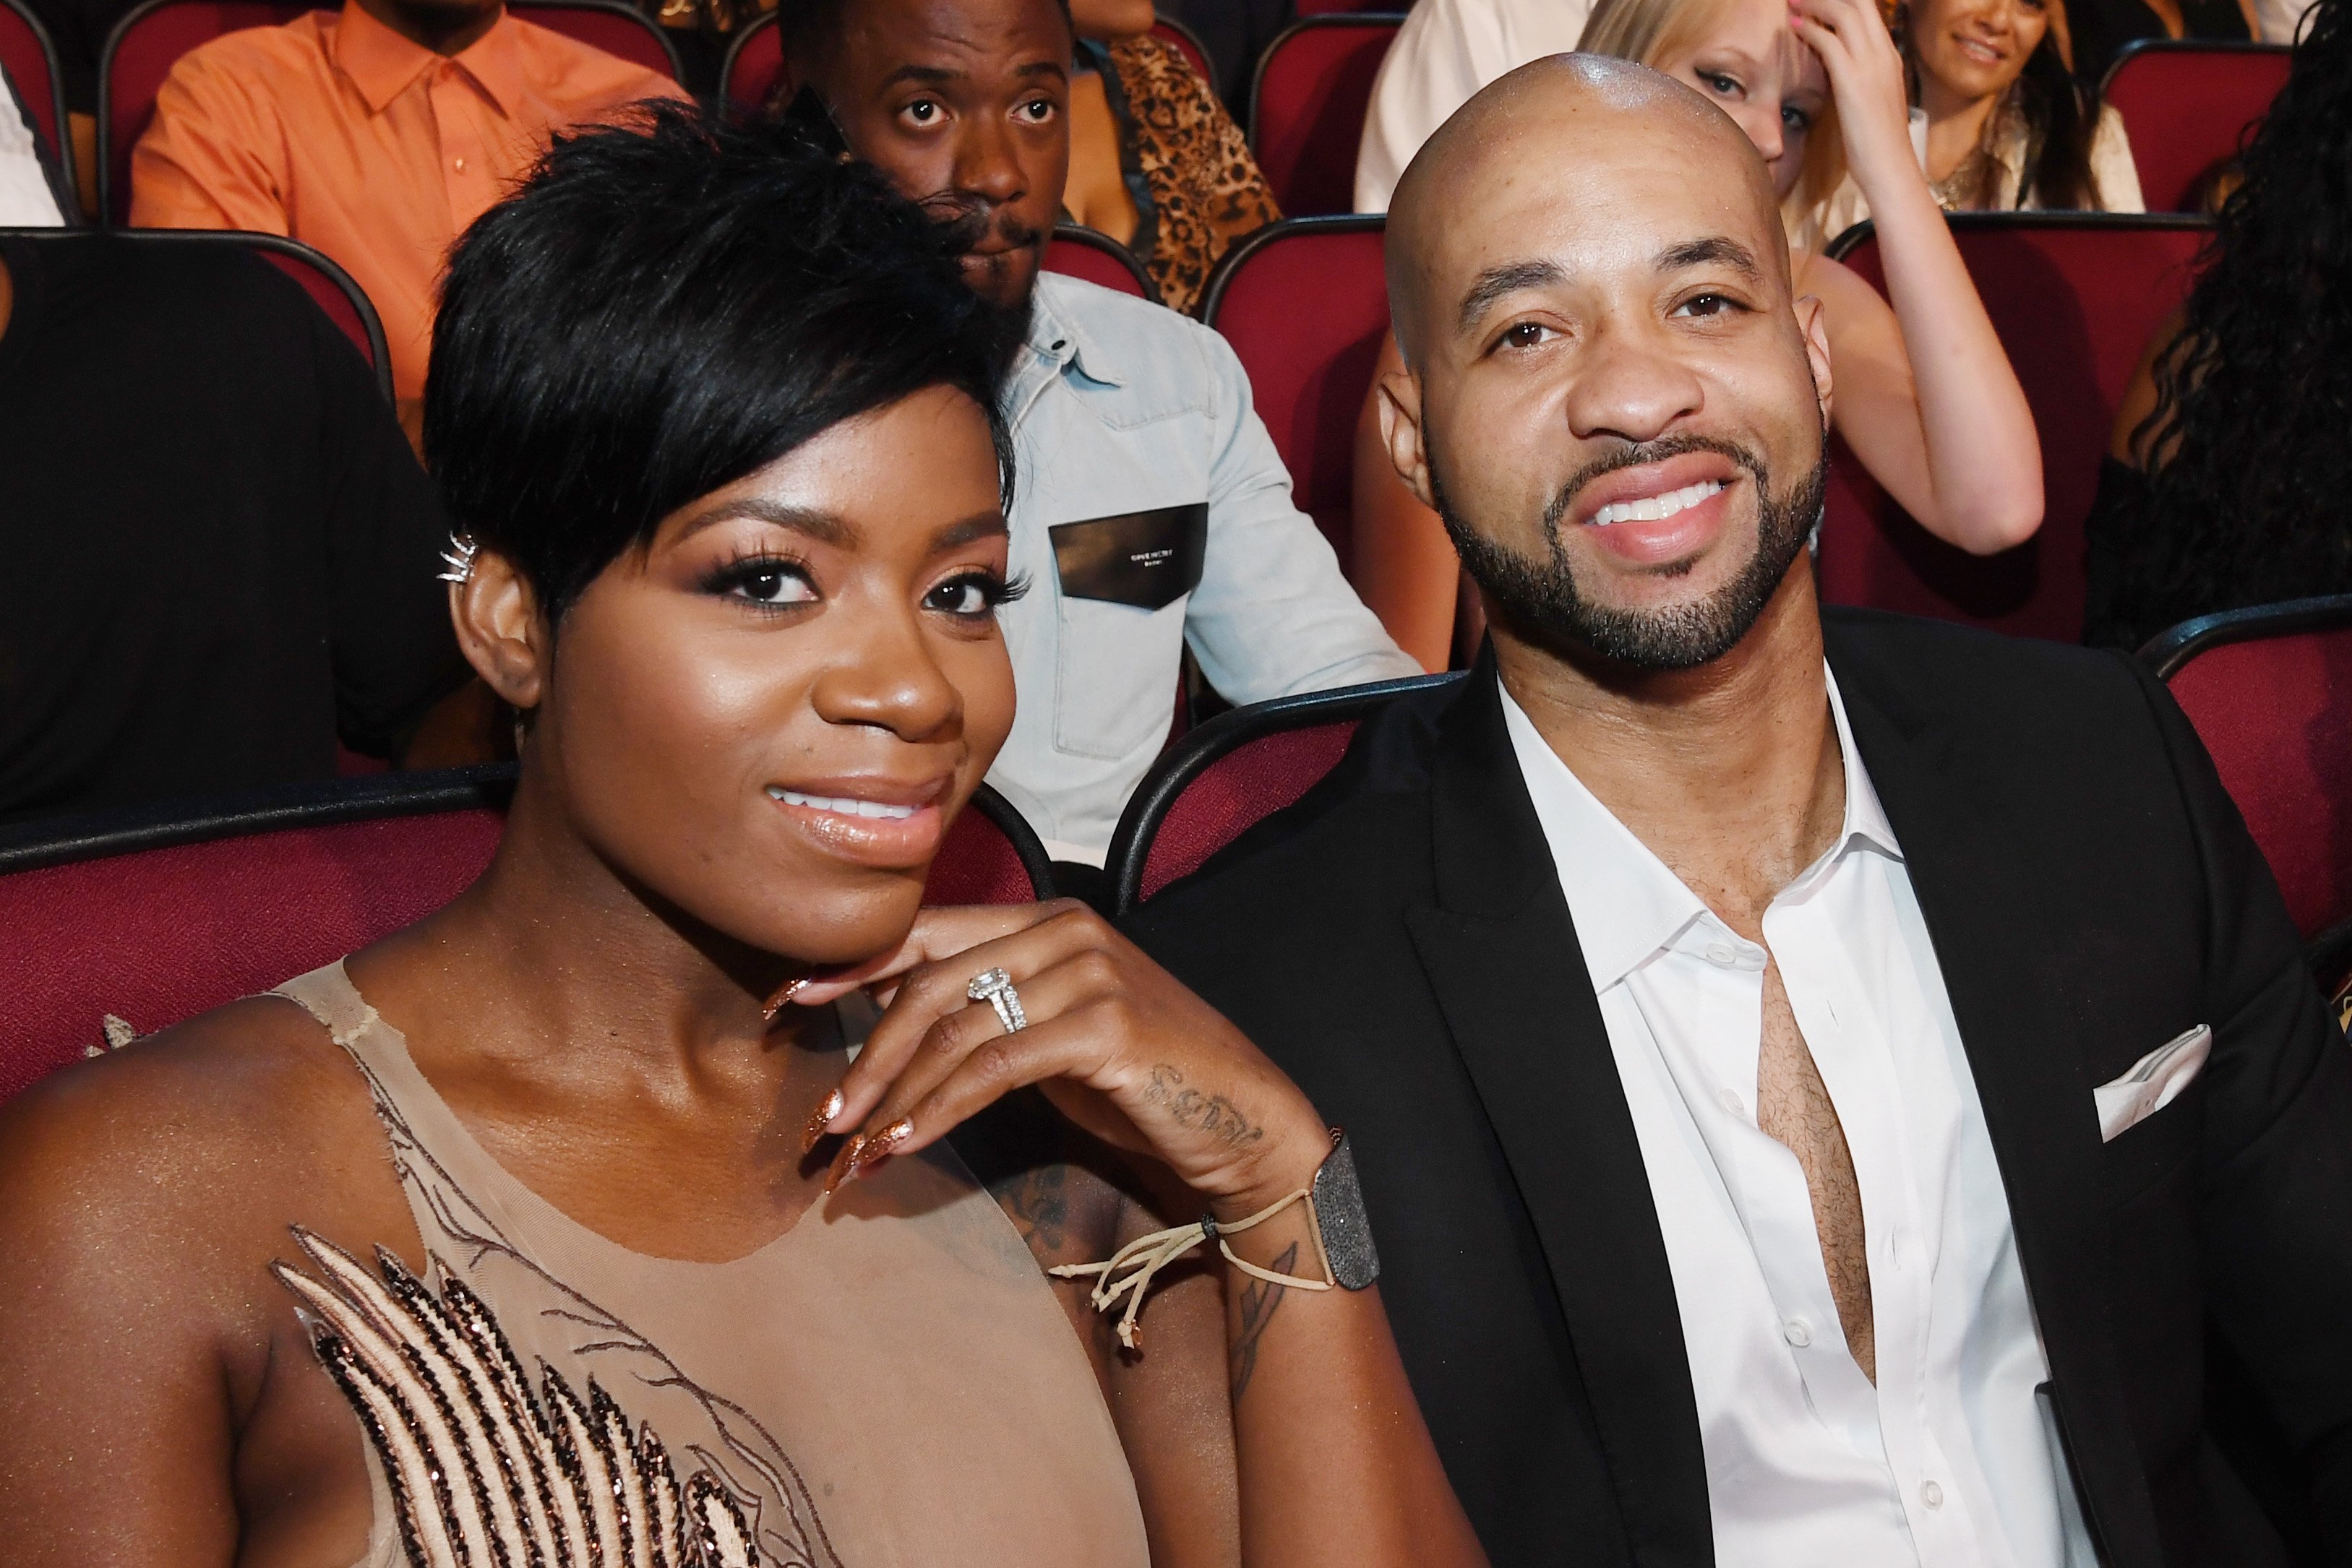 Fantasia Barrino-Taylor & her husband Kendall Taylor at the BET Awards on June 26, 2016 in California | Photo: Getty Images